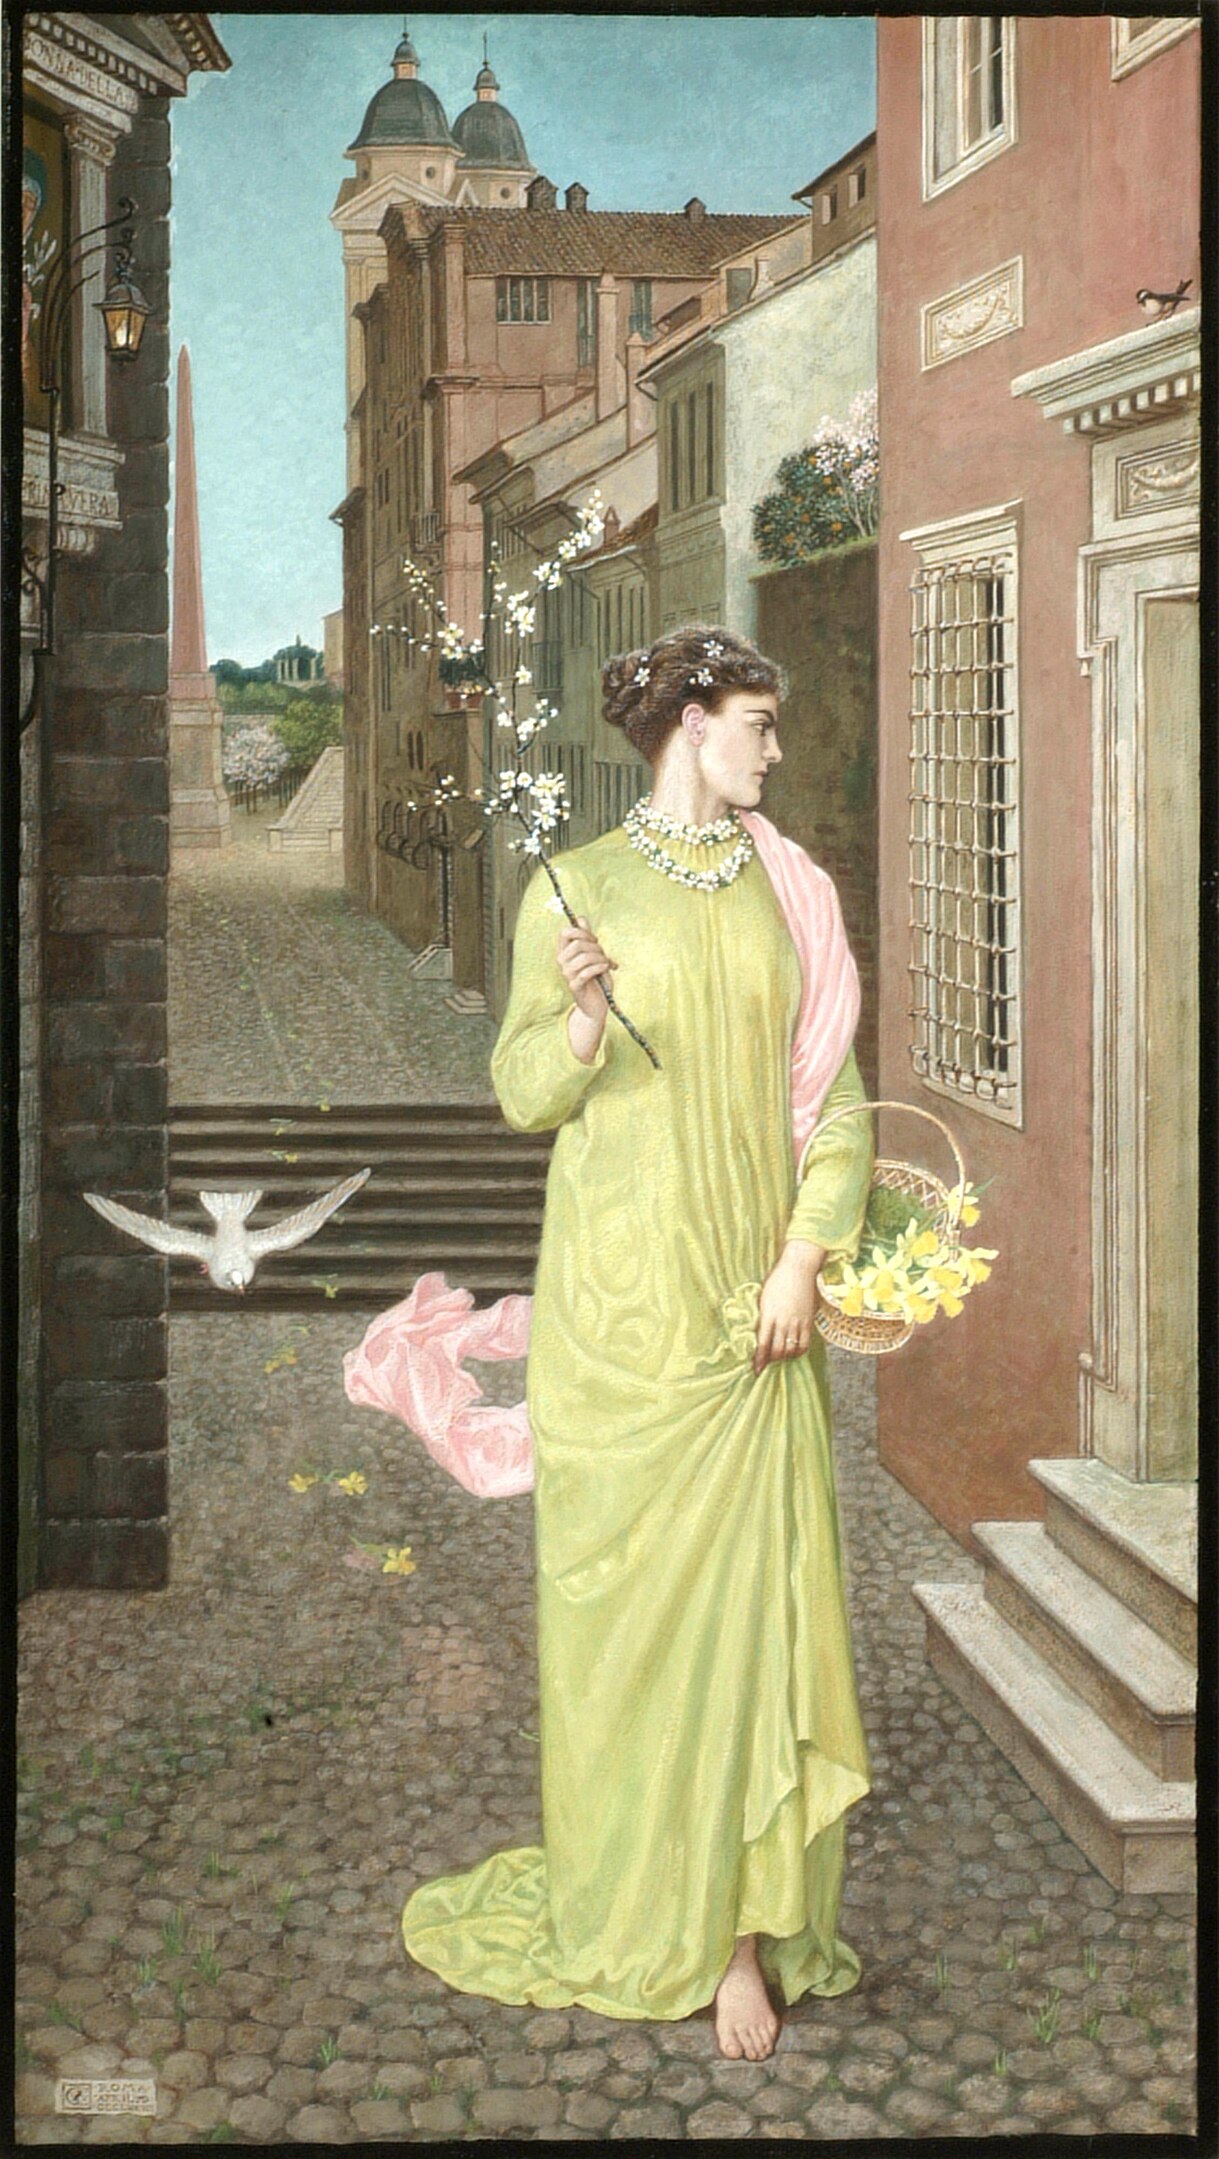 A woman carrying a flower basket walks barefoot along a narrow alleyway and gazes to her left as a dove flies to her right